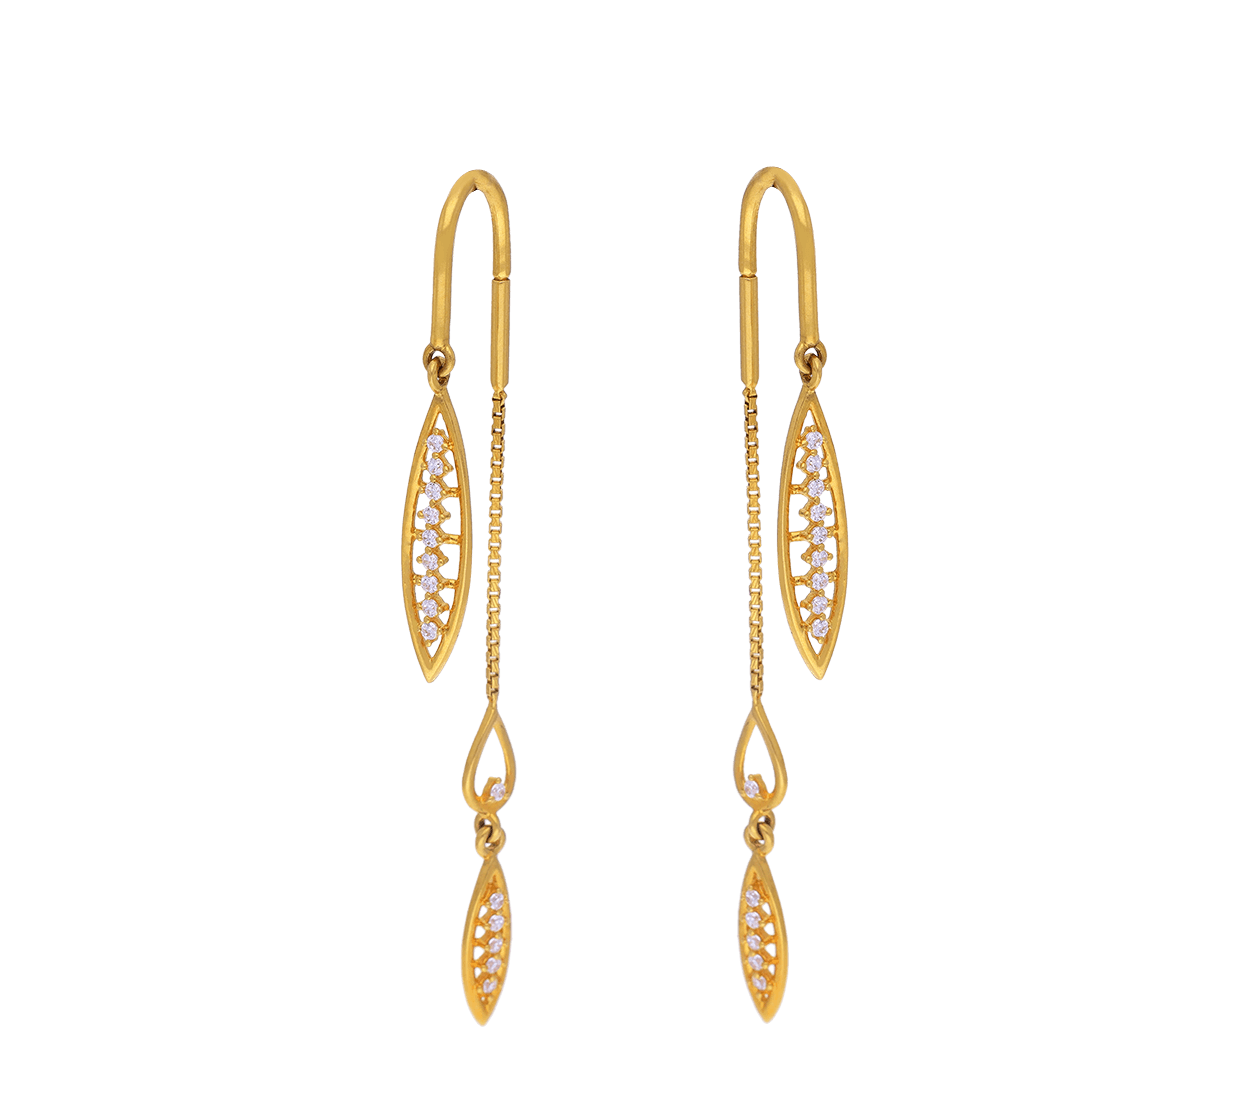 New Antic Fashionable Gold Plated Chain Type Sui Dhaga Earring For Women  And Girls. (Sui Dhaga)